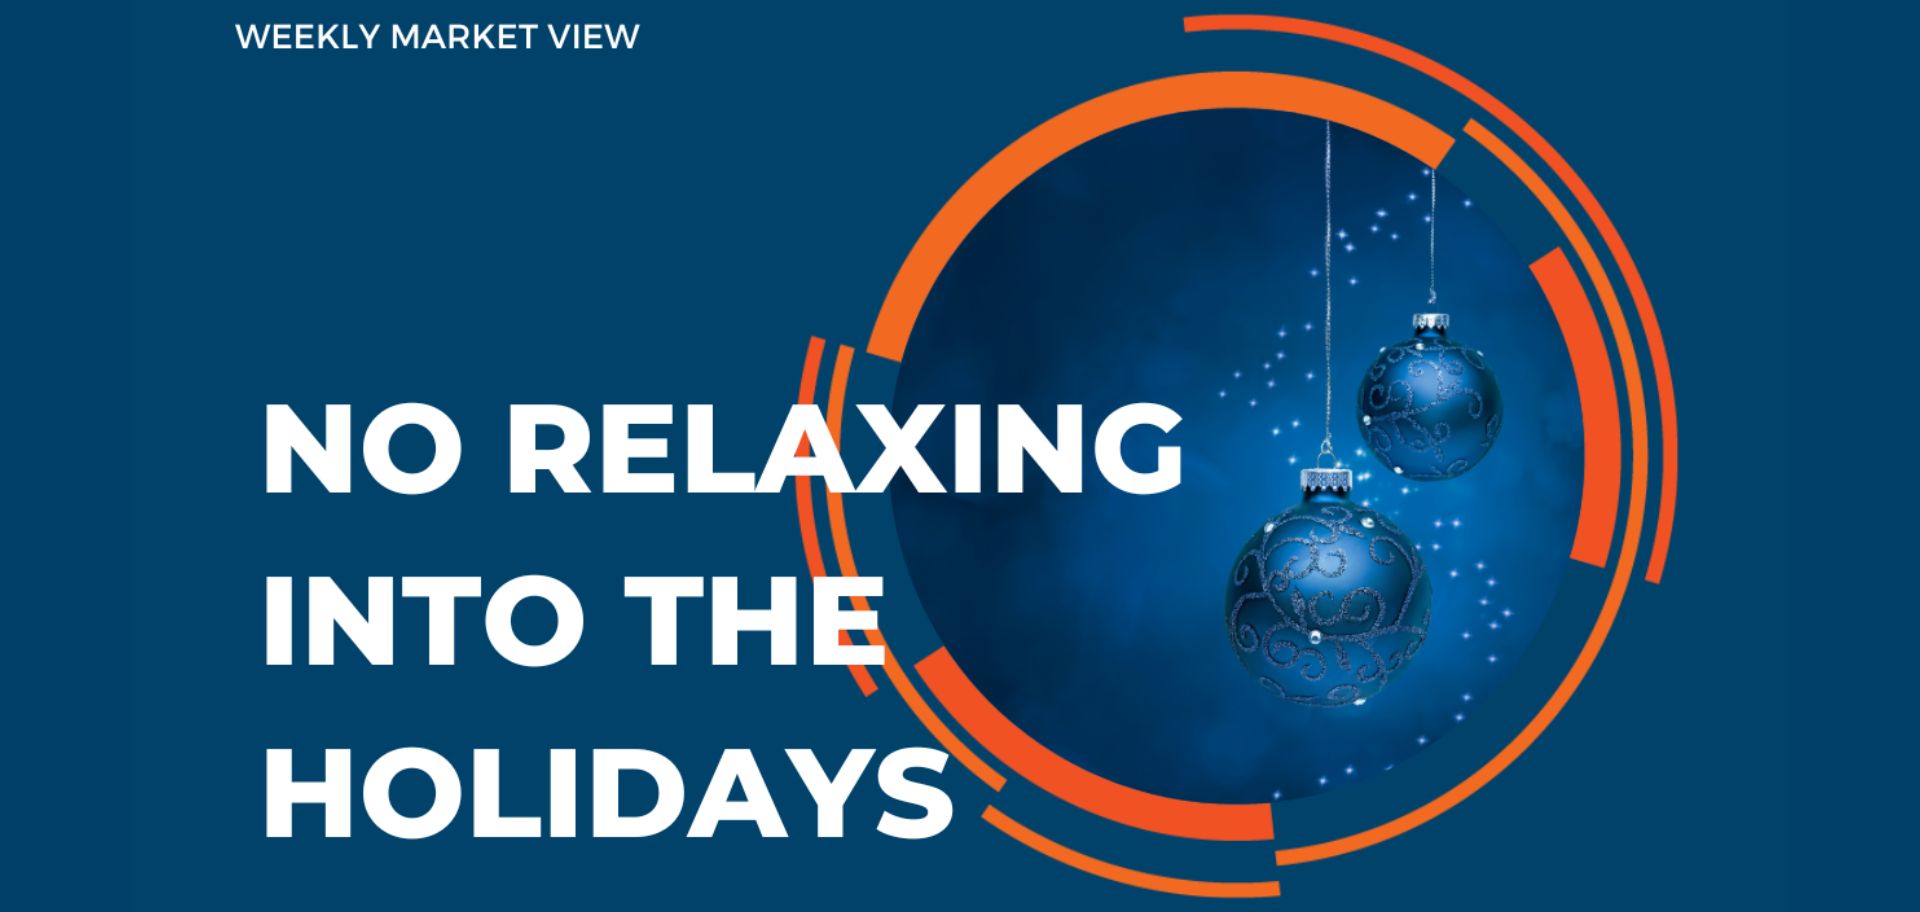 No relaxing into the holidays